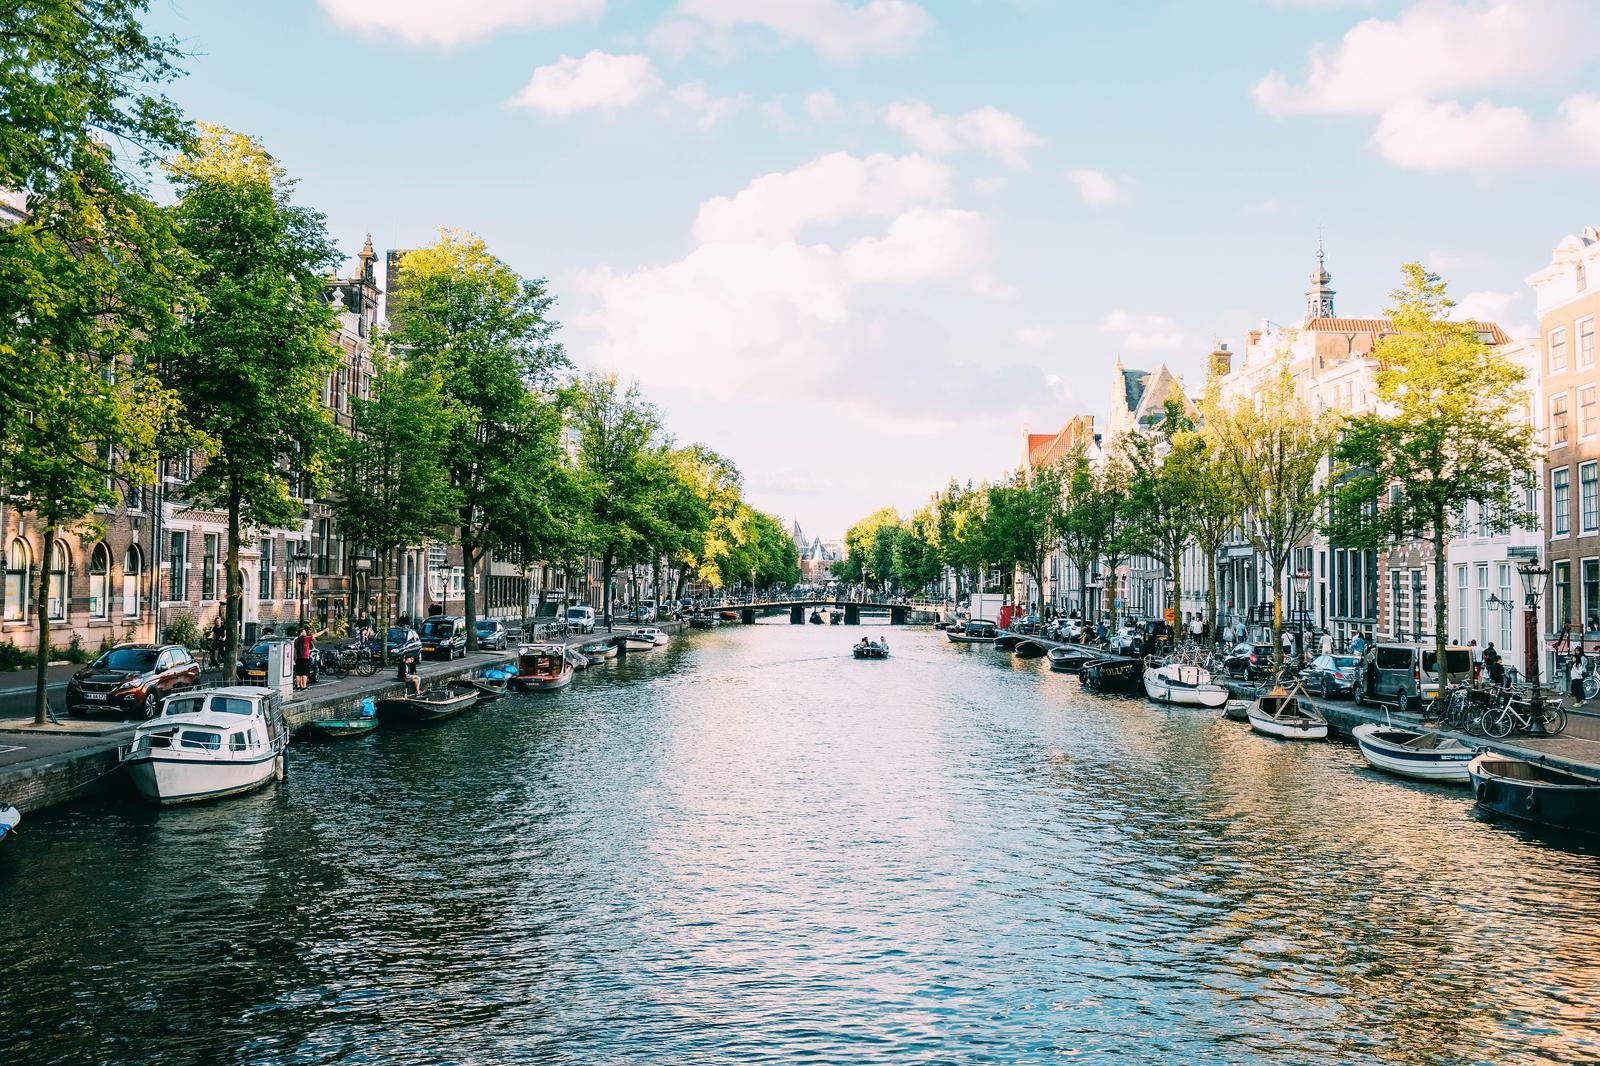 Wanna Know Where You’ll Meet Your Soulmate? ✈️ Go Around the World from “A” to “Z” to Find Out Once and for All Netherlands